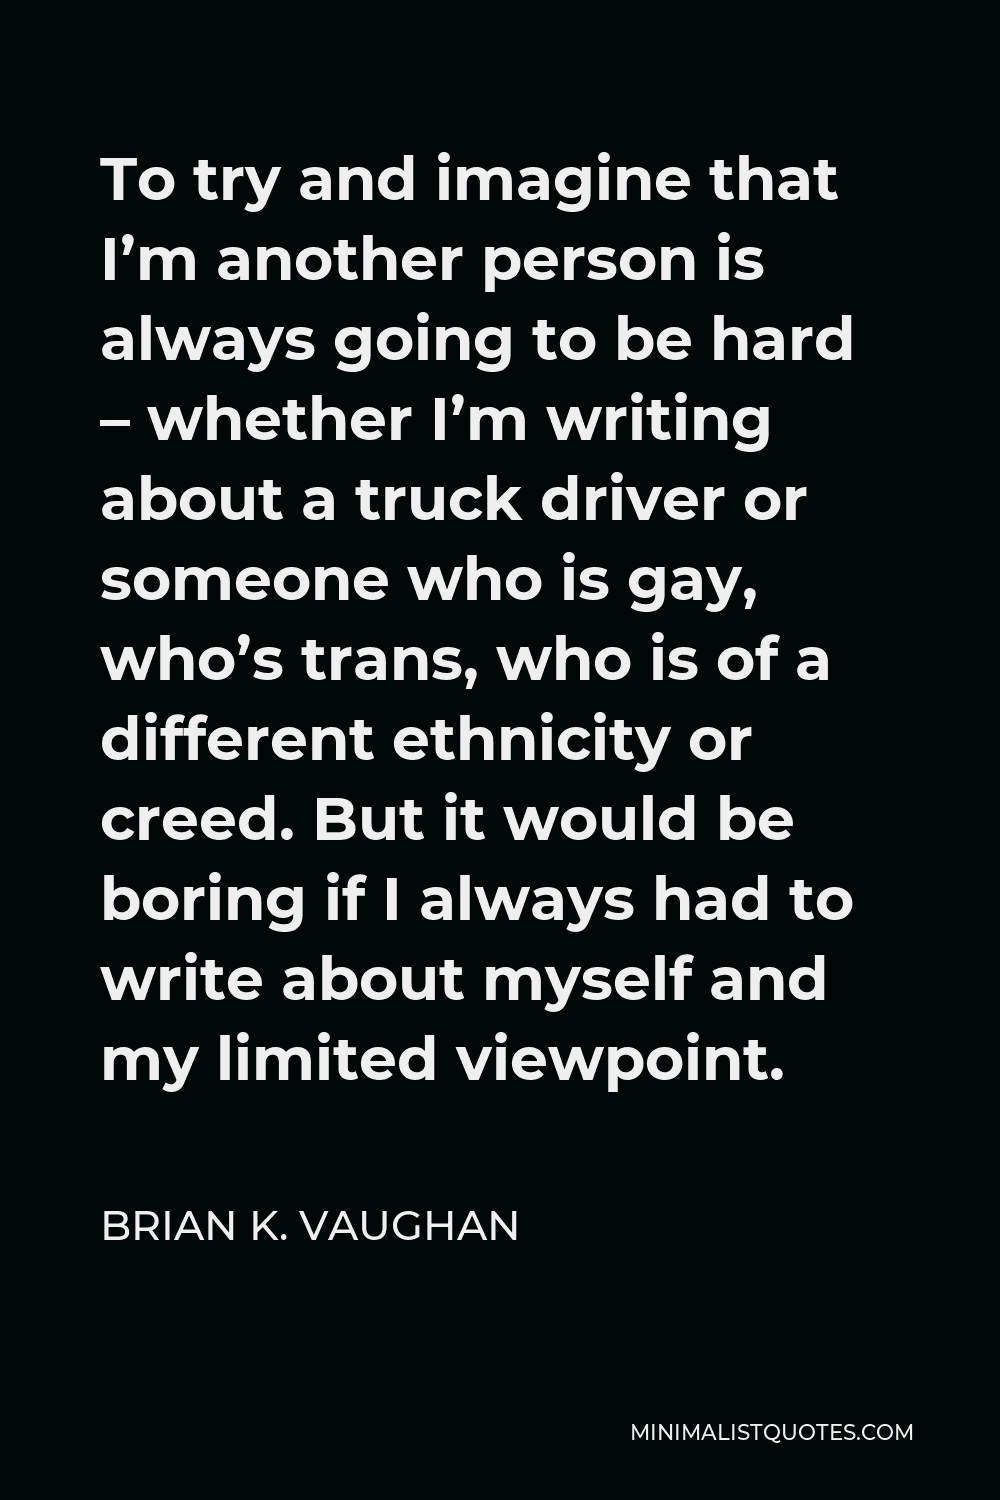 Brian K. Vaughan Quote - To try and imagine that I’m another person is always going to be hard – whether I’m writing about a truck driver or someone who is gay, who’s trans, who is of a different ethnicity or creed. But it would be boring if I always had to write about myself and my limited viewpoint.